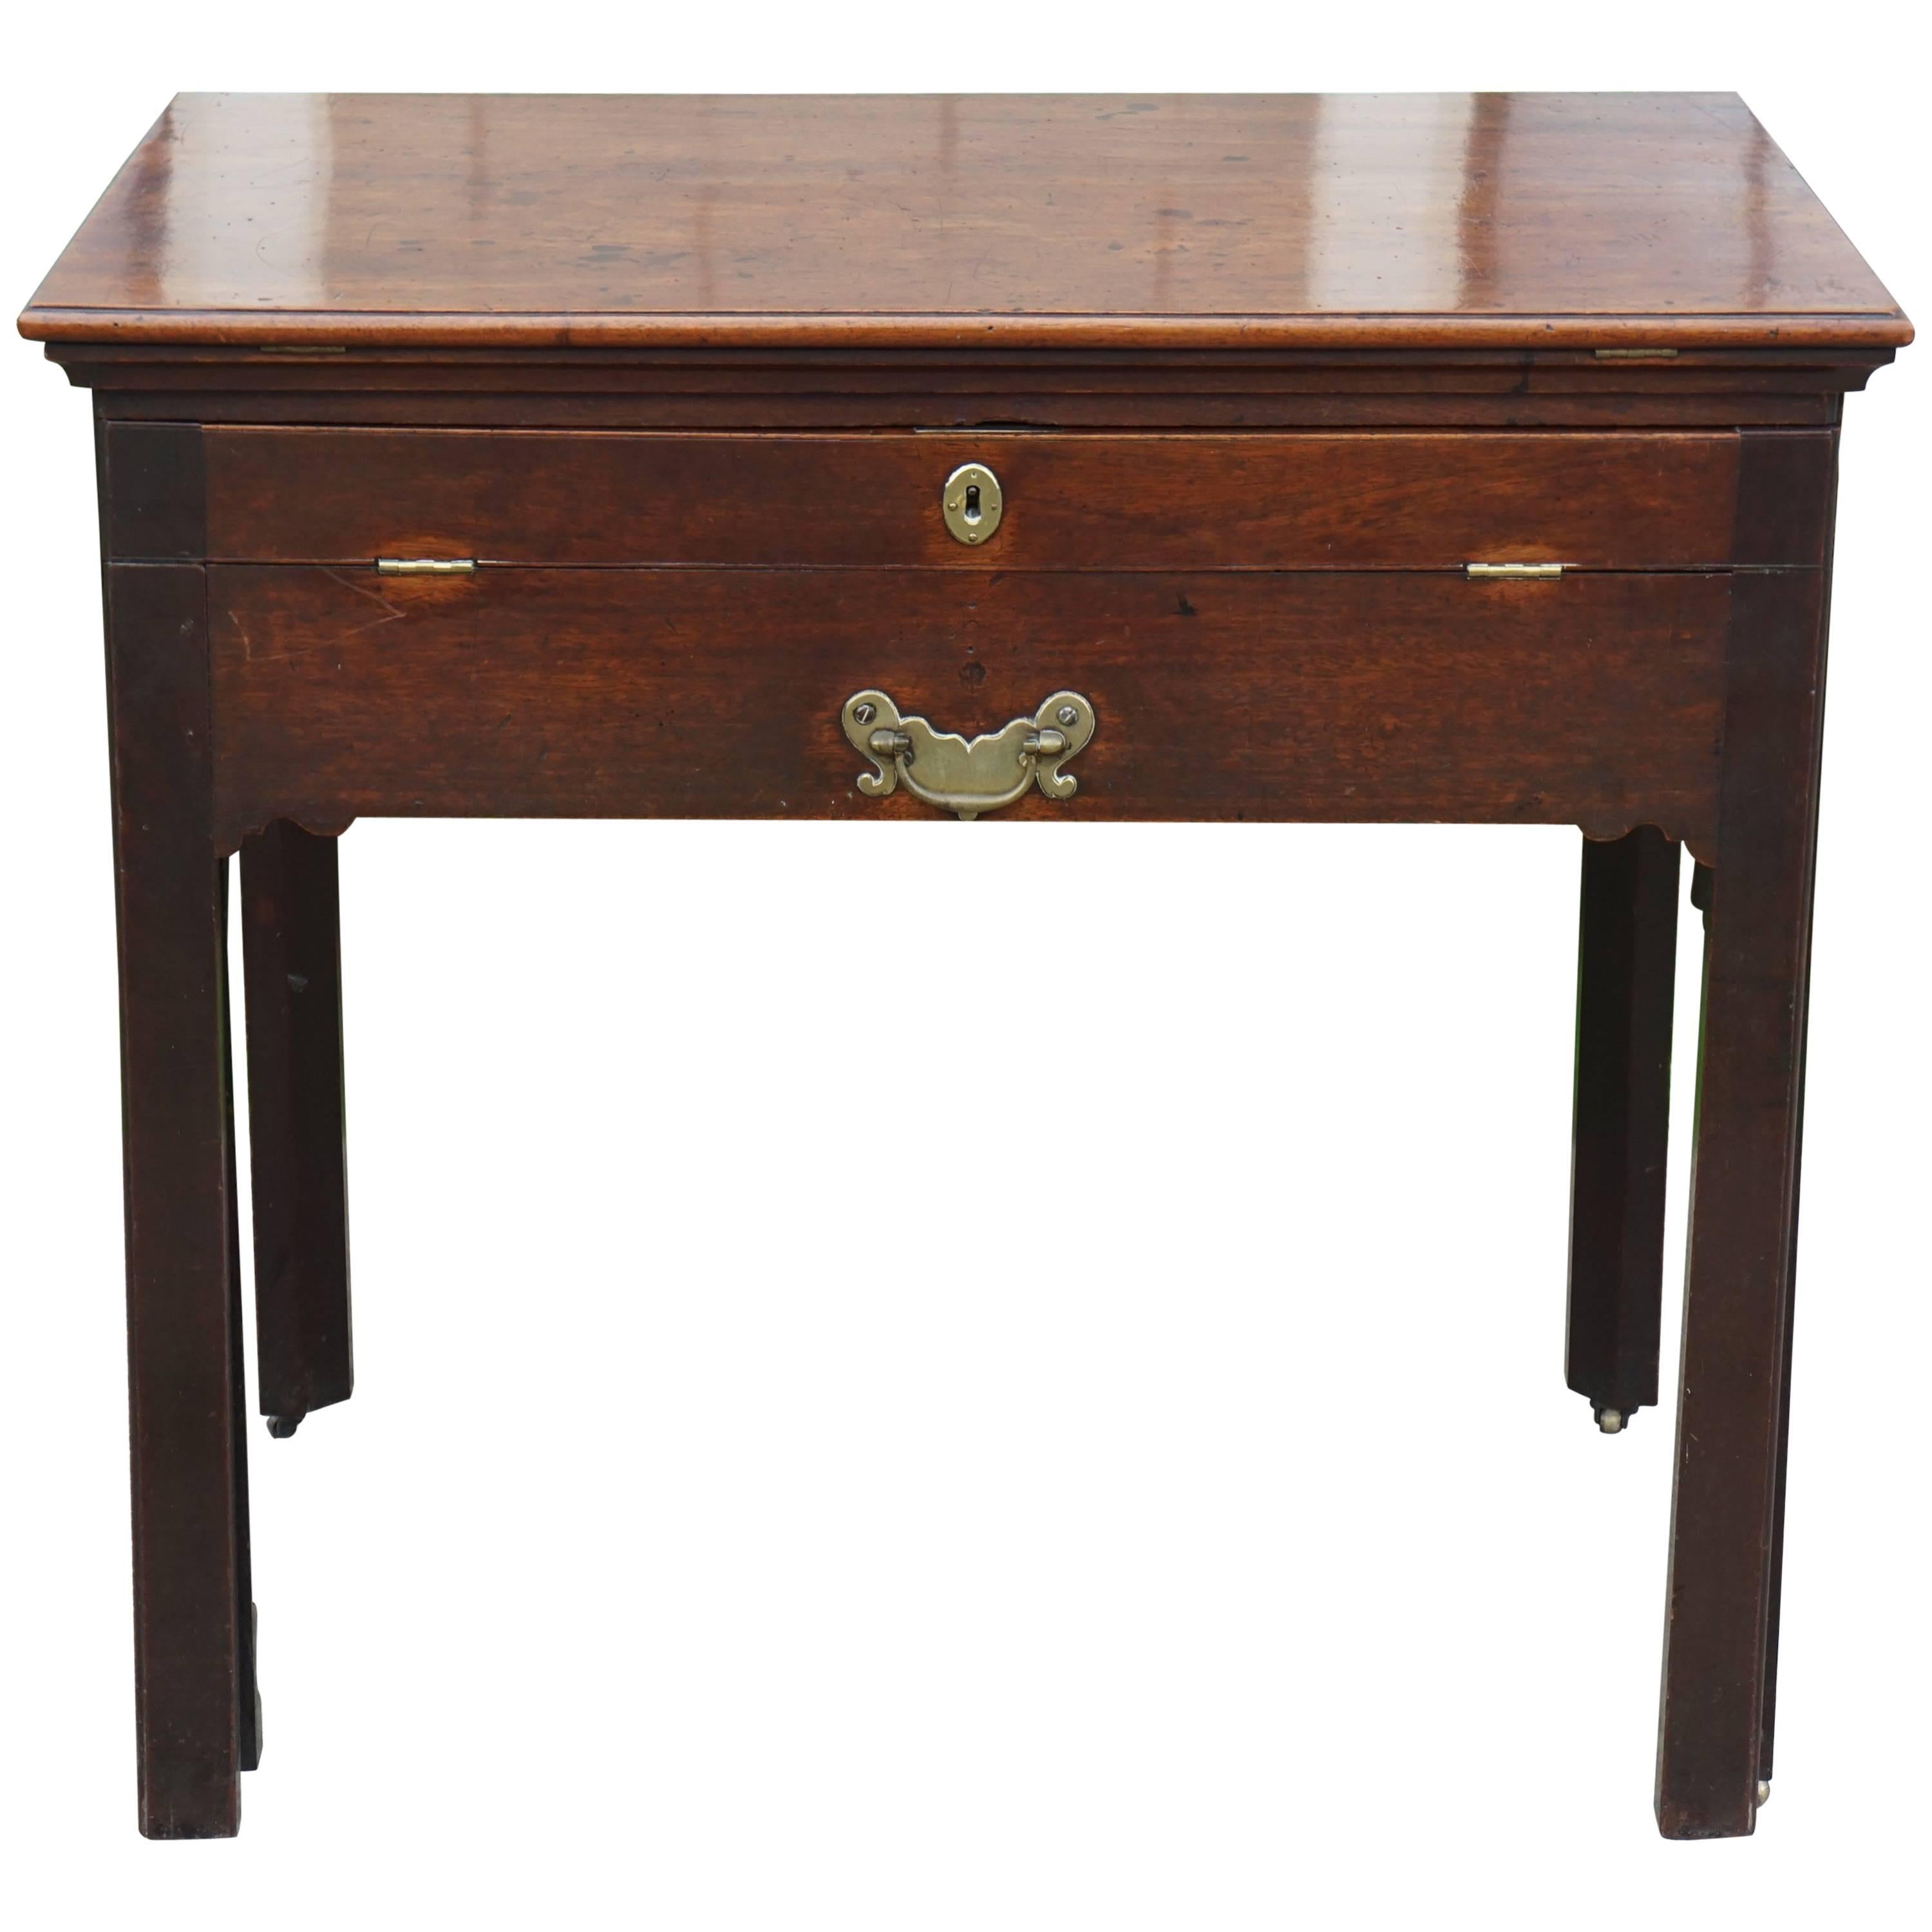 Period Early George III Mahogany Architects Work Table